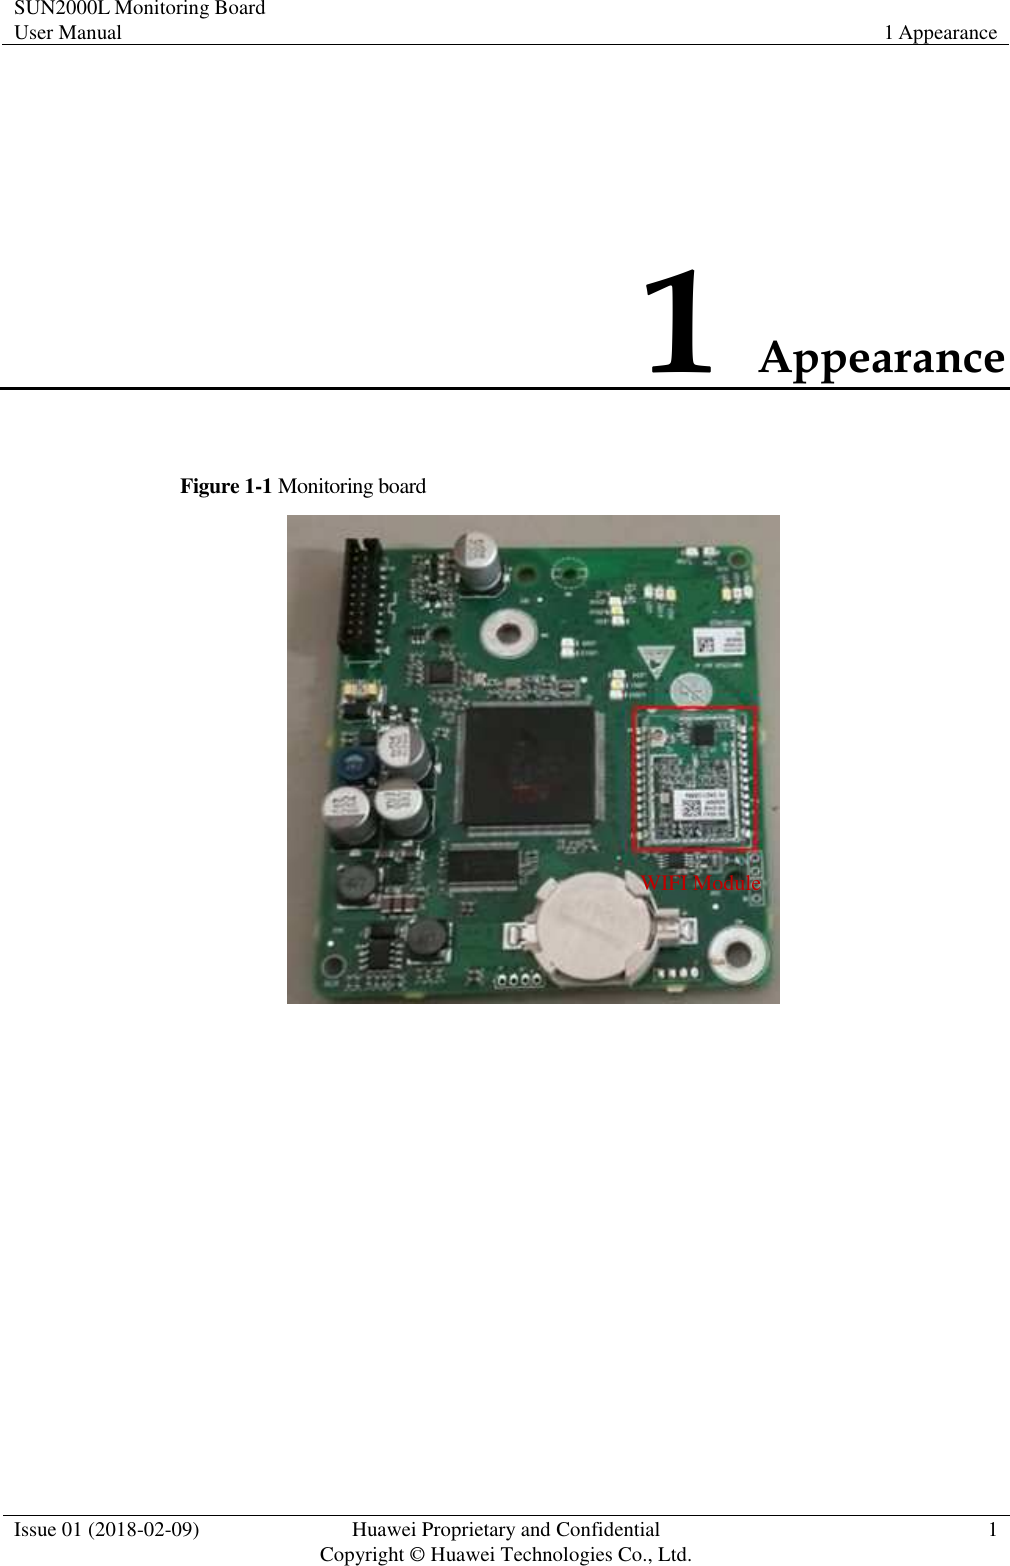 SUN2000L Monitoring Board User Manual 1 Appearance  Issue 01 (2018-02-09)  Huawei Proprietary and Confidential                   Copyright © Huawei Technologies Co., Ltd. 1  1 Appearance Figure 1-1 Monitoring board   WIFI Module 